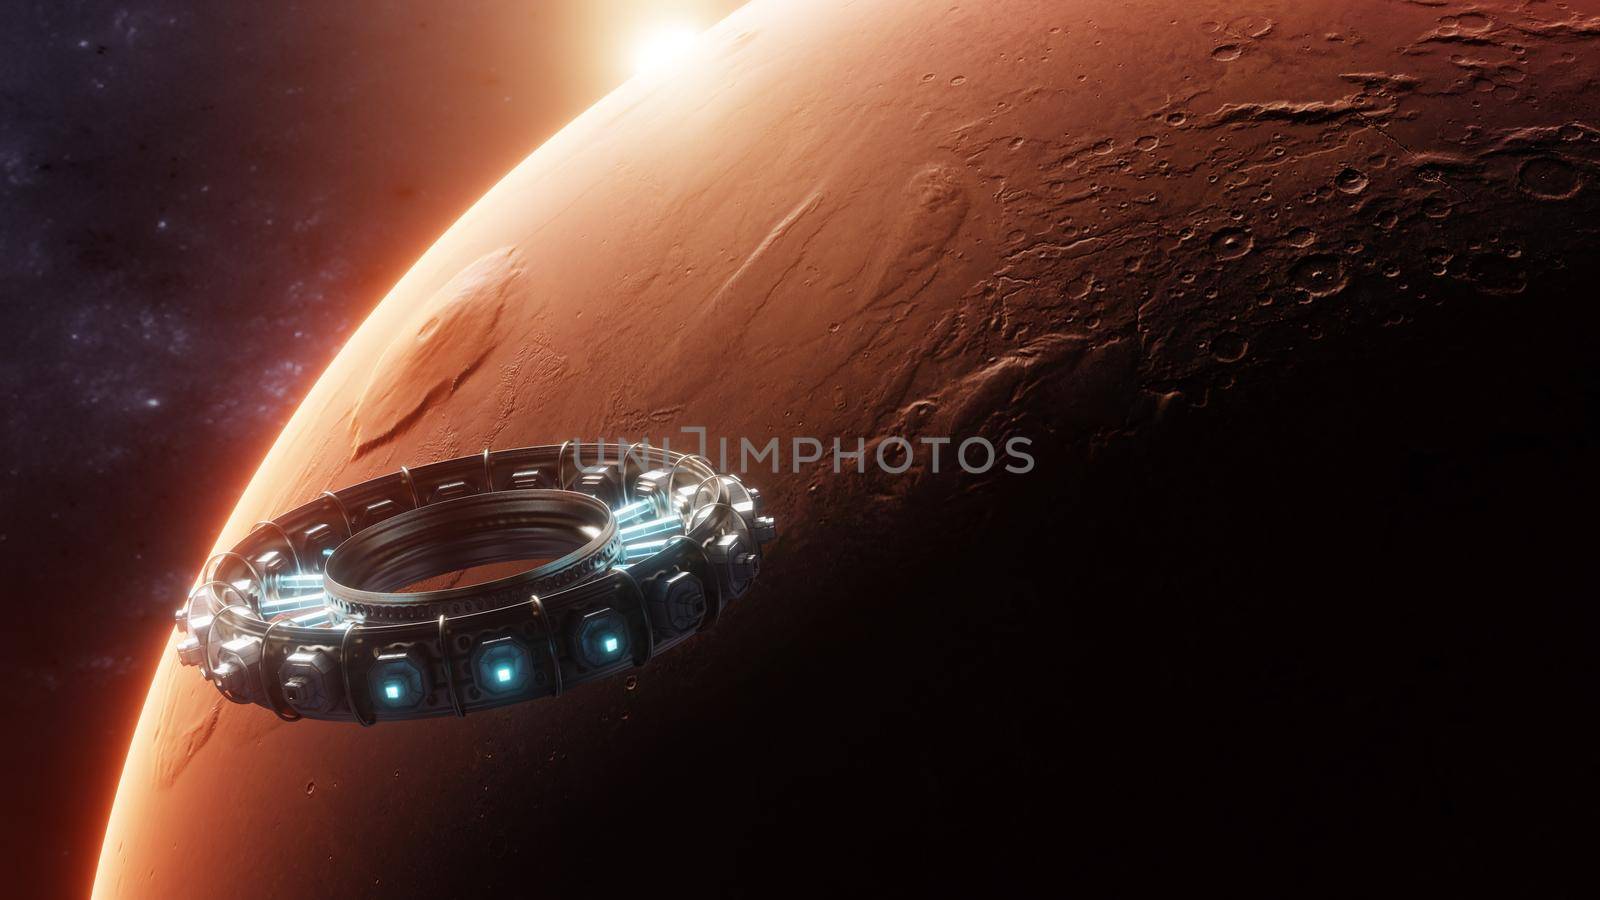 Exploring Mars with spaceships among the stars using international scientific research center. Orbiting shuttle in the univers and atmosphere. Images from NASA. Rendered 3D illustration